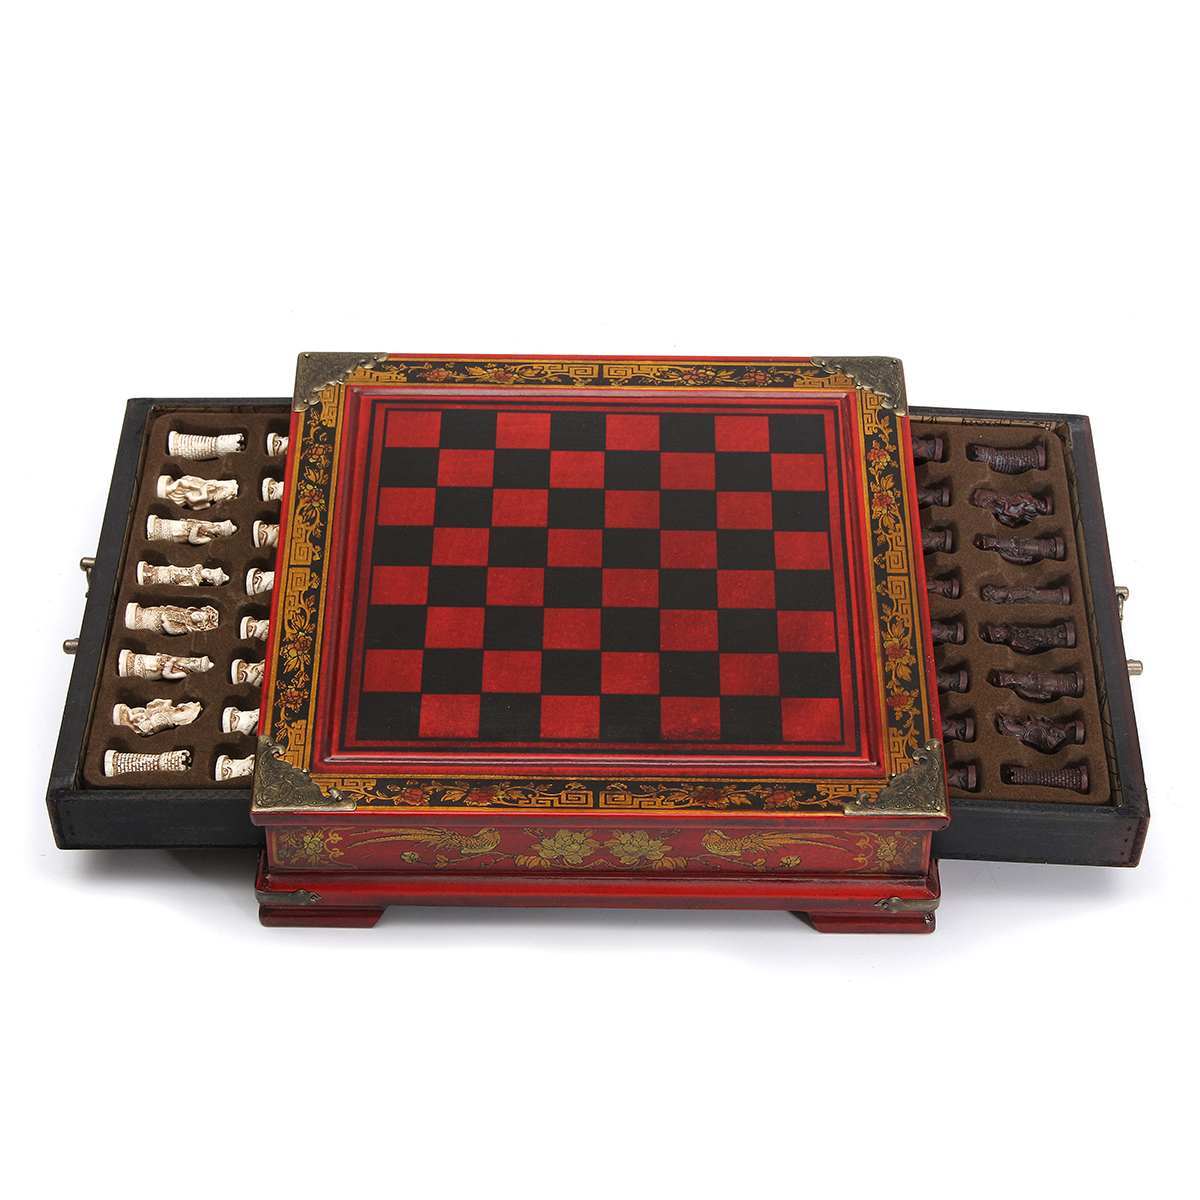 32PcsSet-Resin-Chinese-Chess-With-Coffee-Wooden-Table-Vintage-Collectibles-Gift-1108169-3